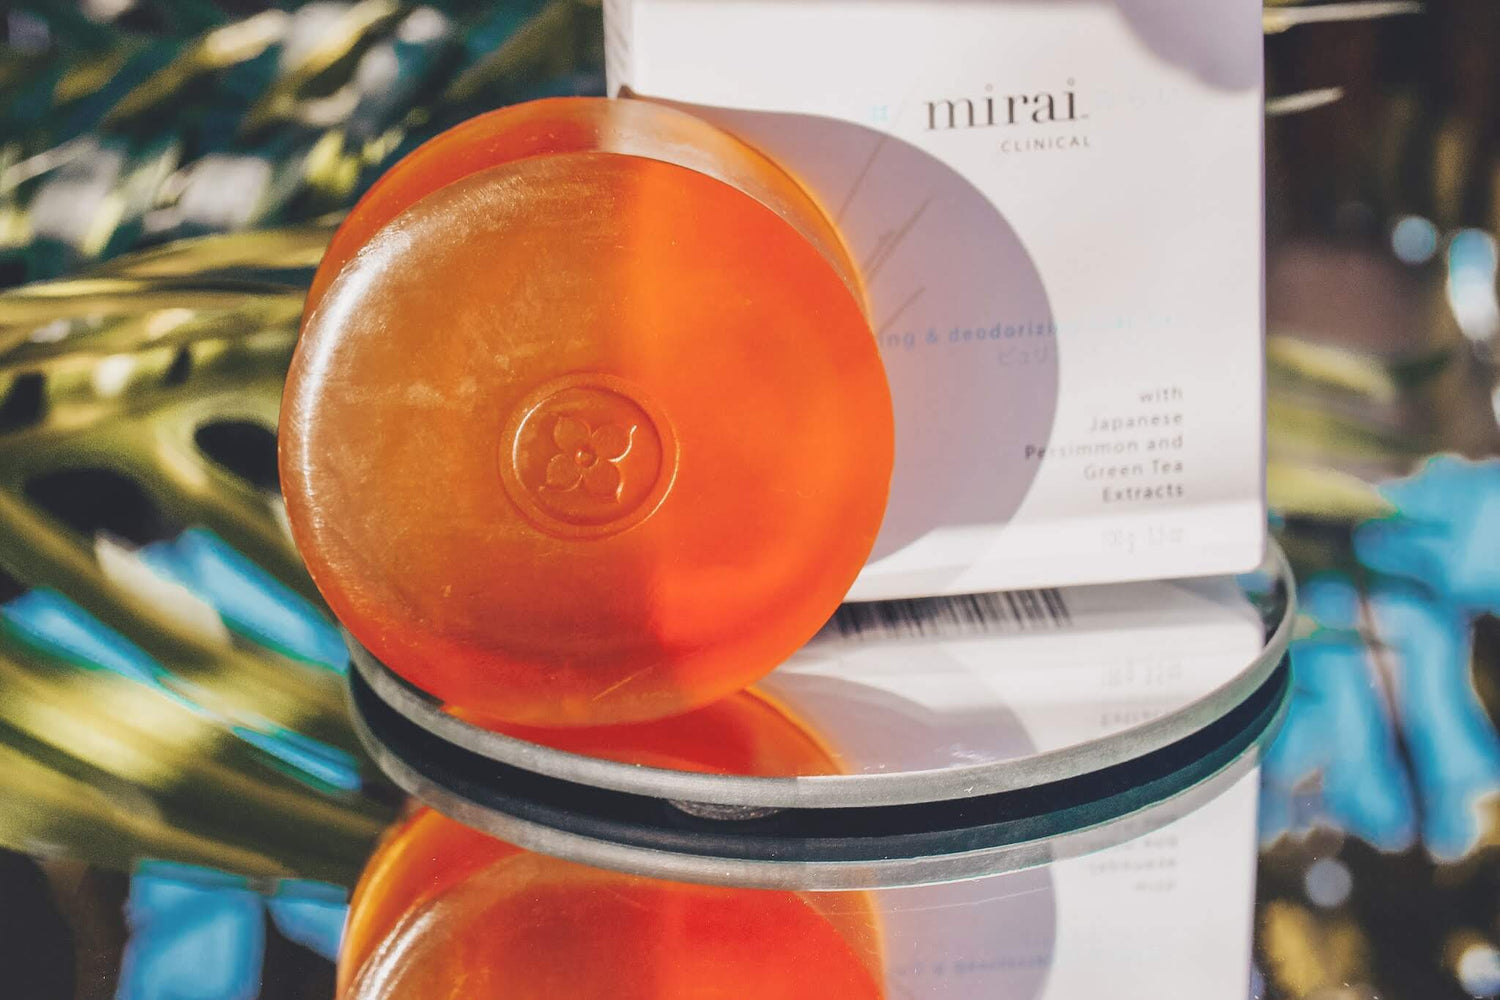 Mirai Clinical Deodorizing Soap with Natural Japanese Persimmon for Body Odor Control